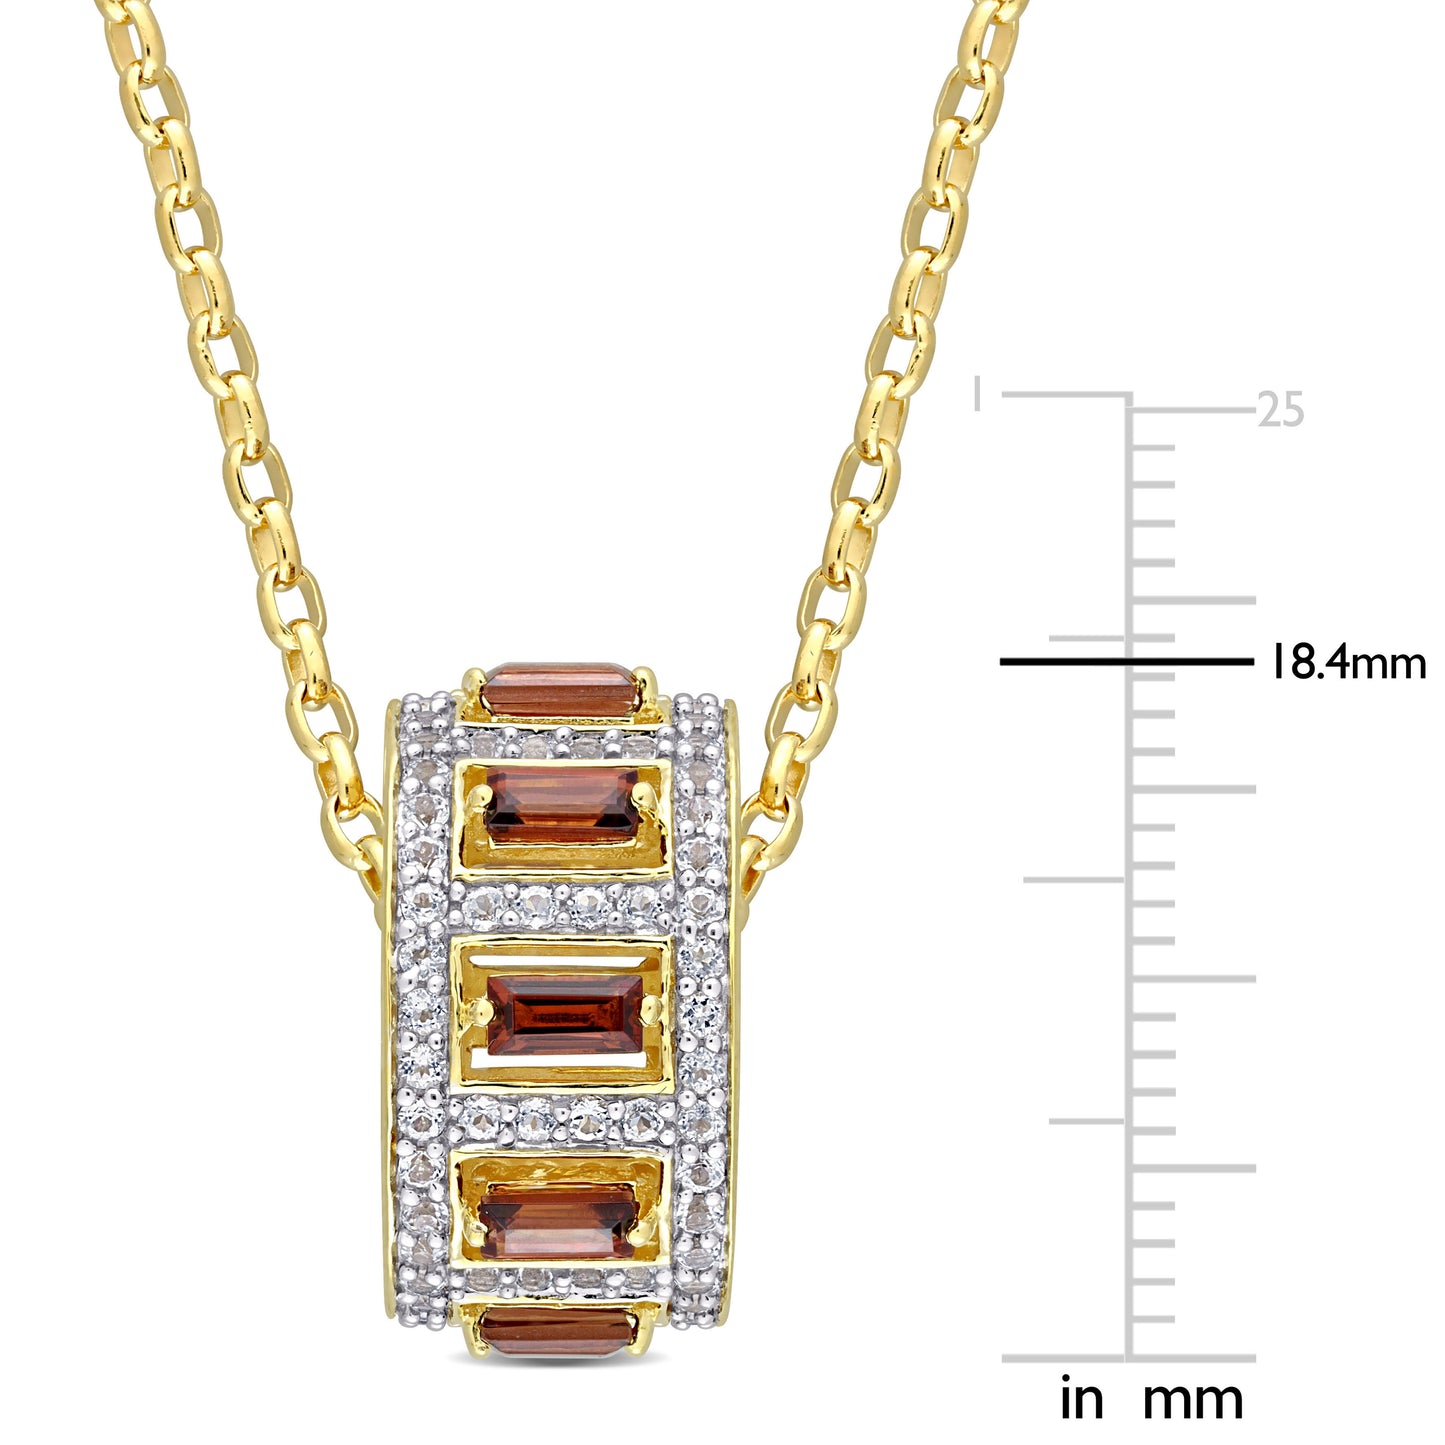 Garnet & White Topaz Necklace in Yellow Plated Sterling Silver